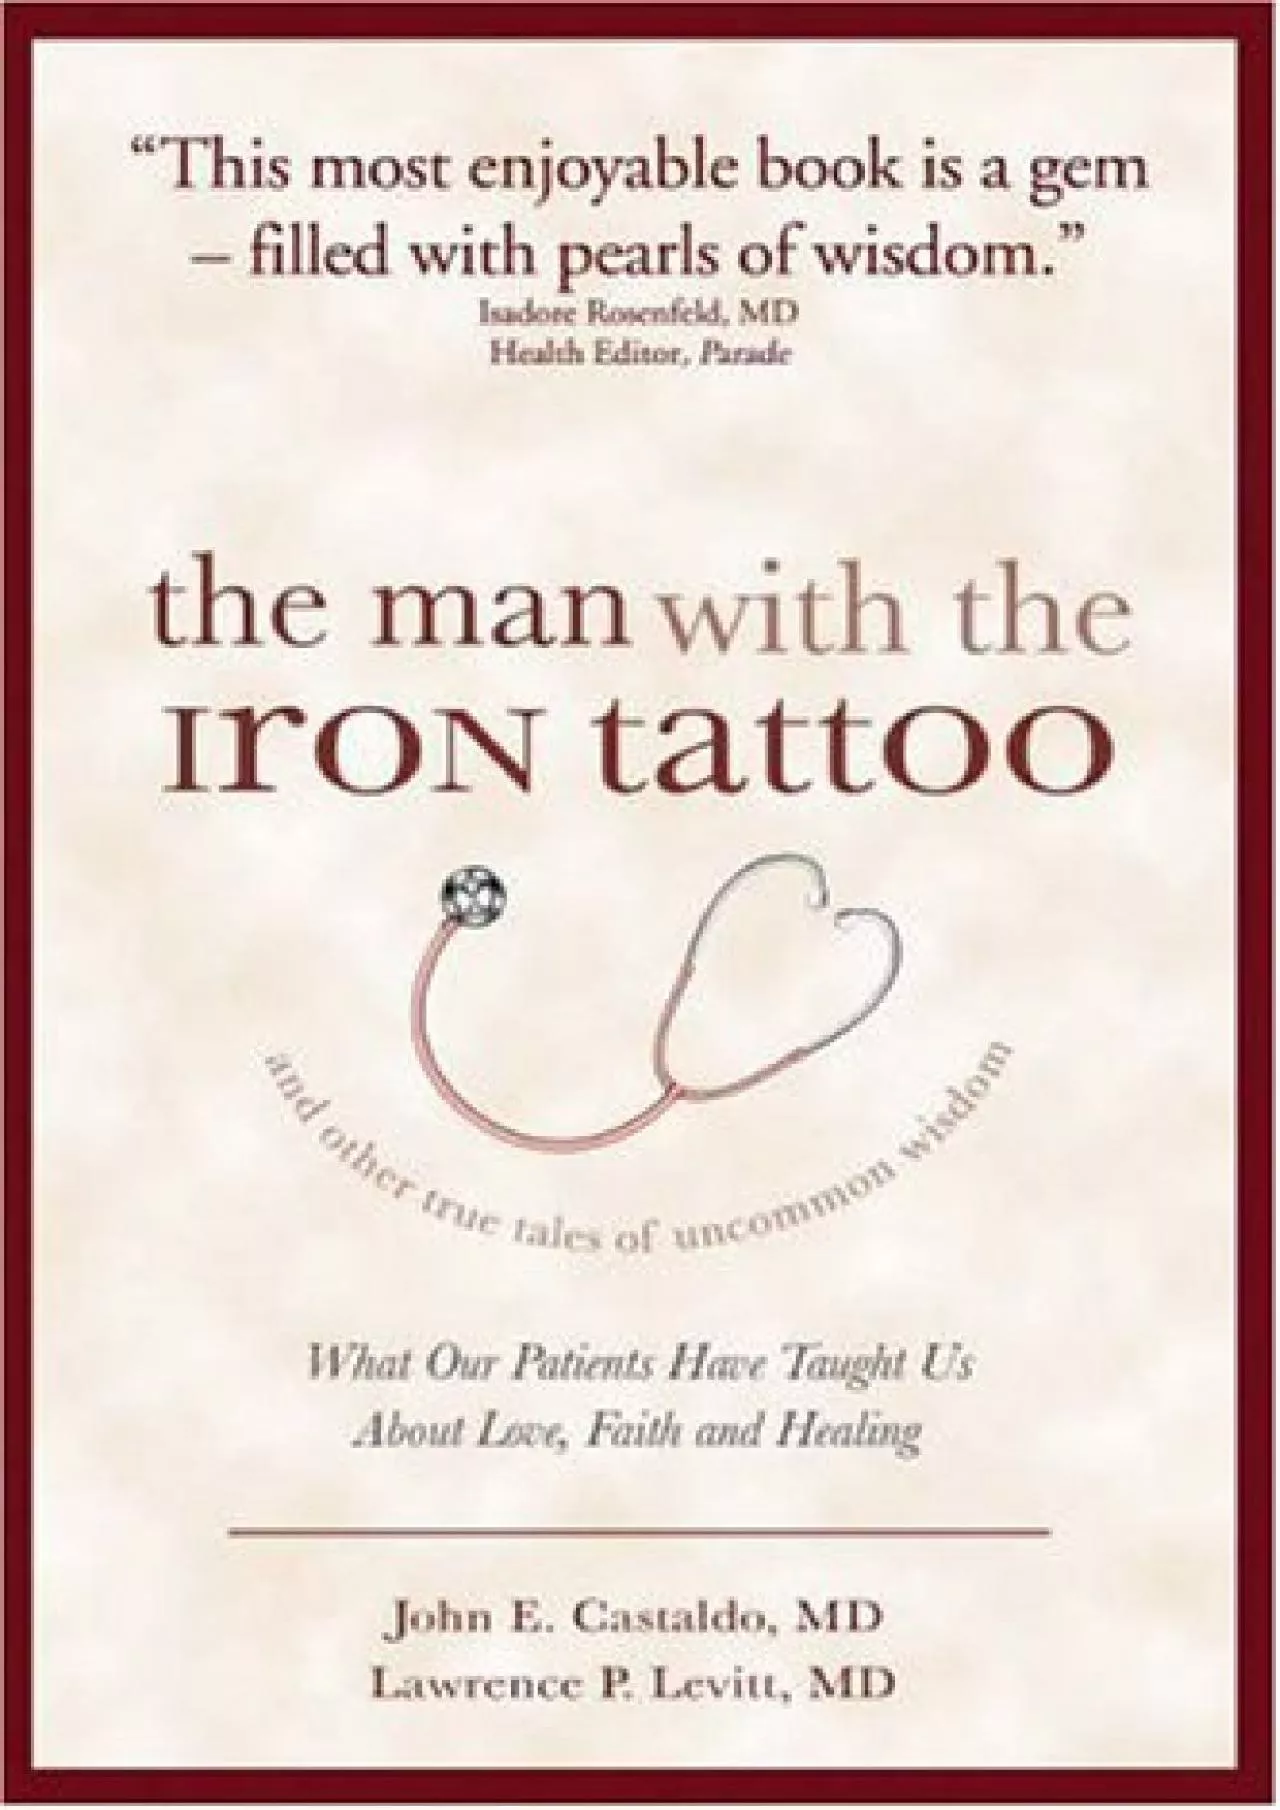 (DOWNLOAD)-The Man With the Iron Tattoo And Other True Tales of Uncommon Wisdom: What